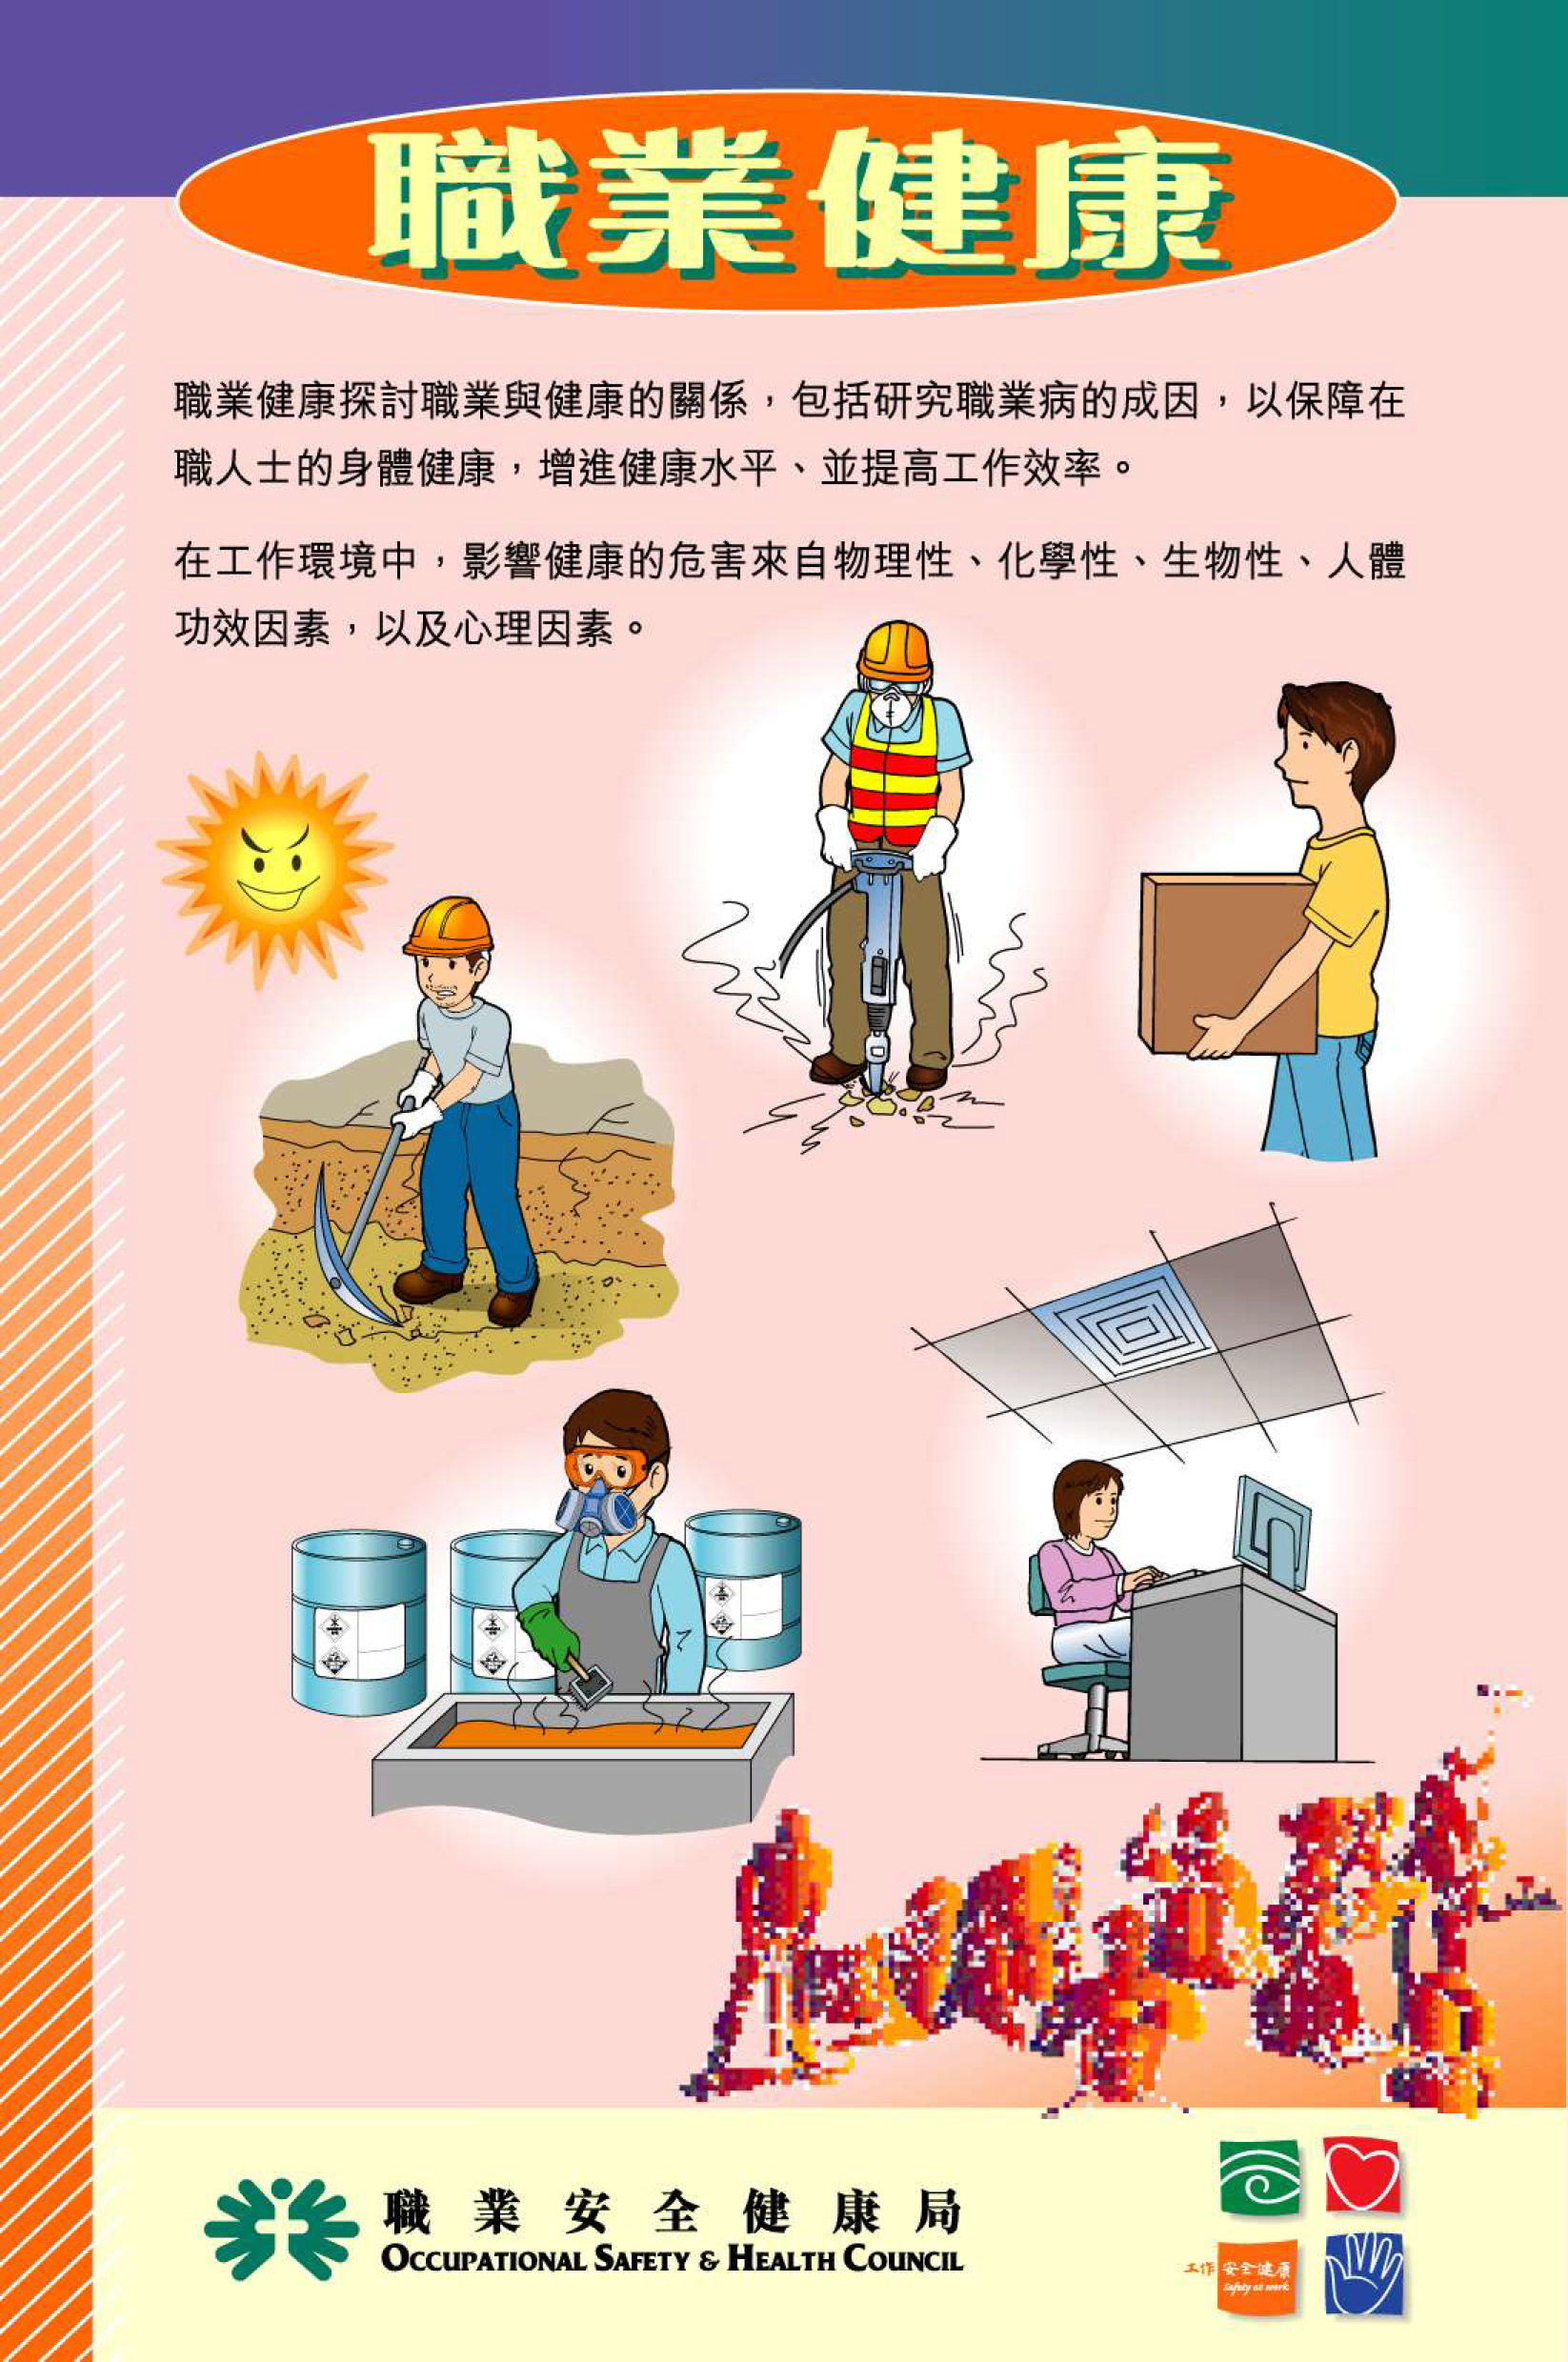 Occupational Health (Chinese version)(published by OSHC)